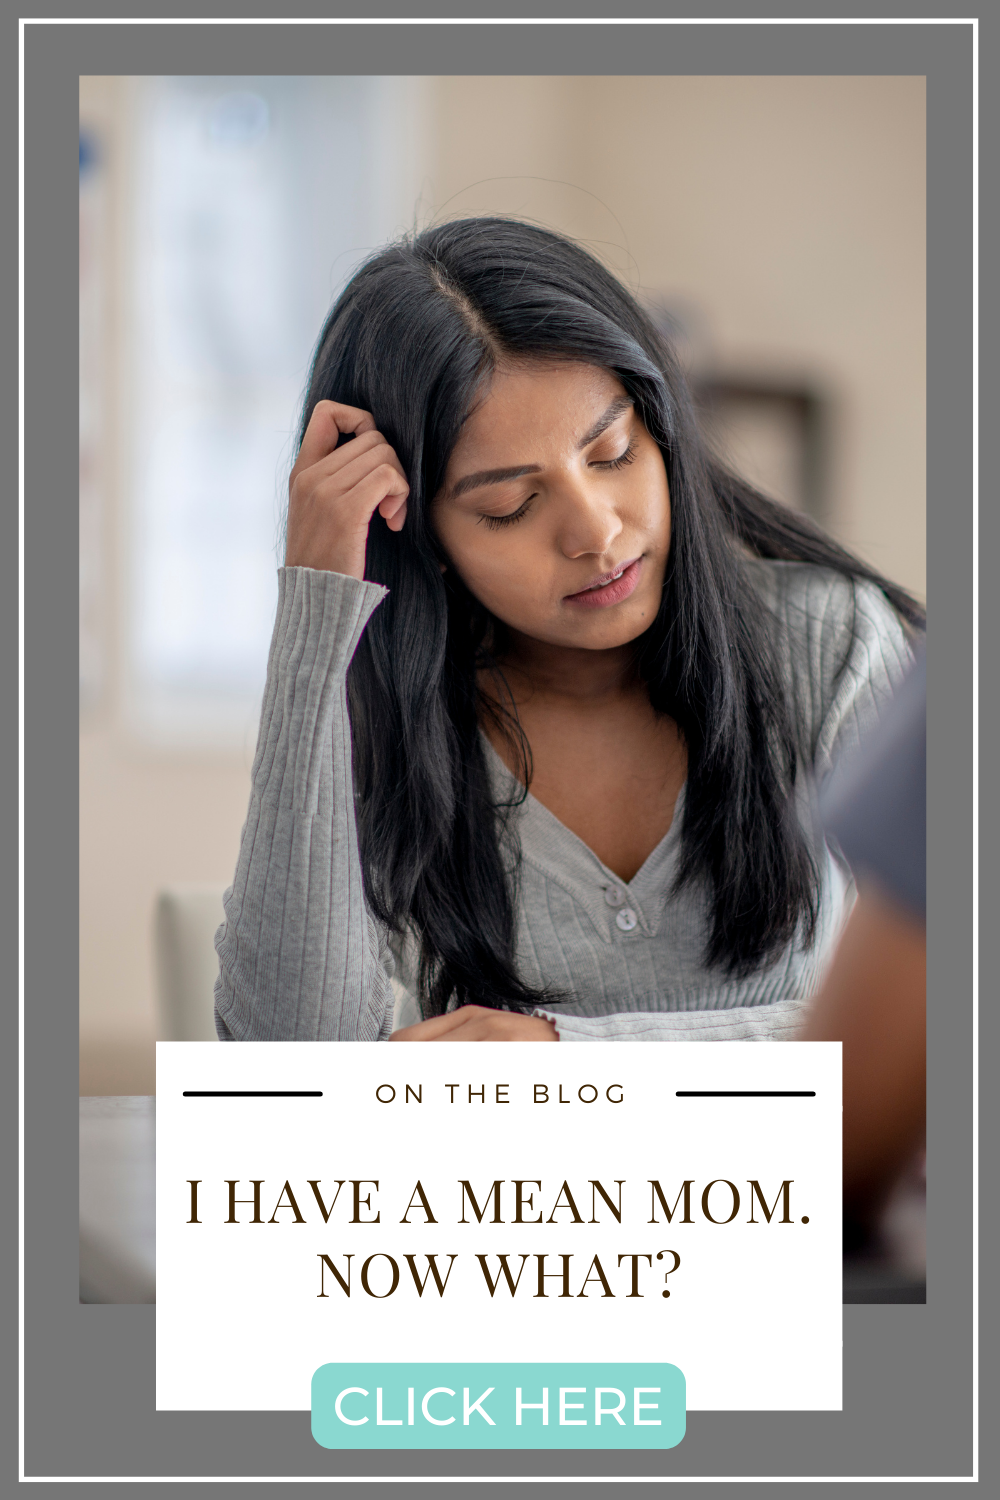 What to do if you have a mean mom?